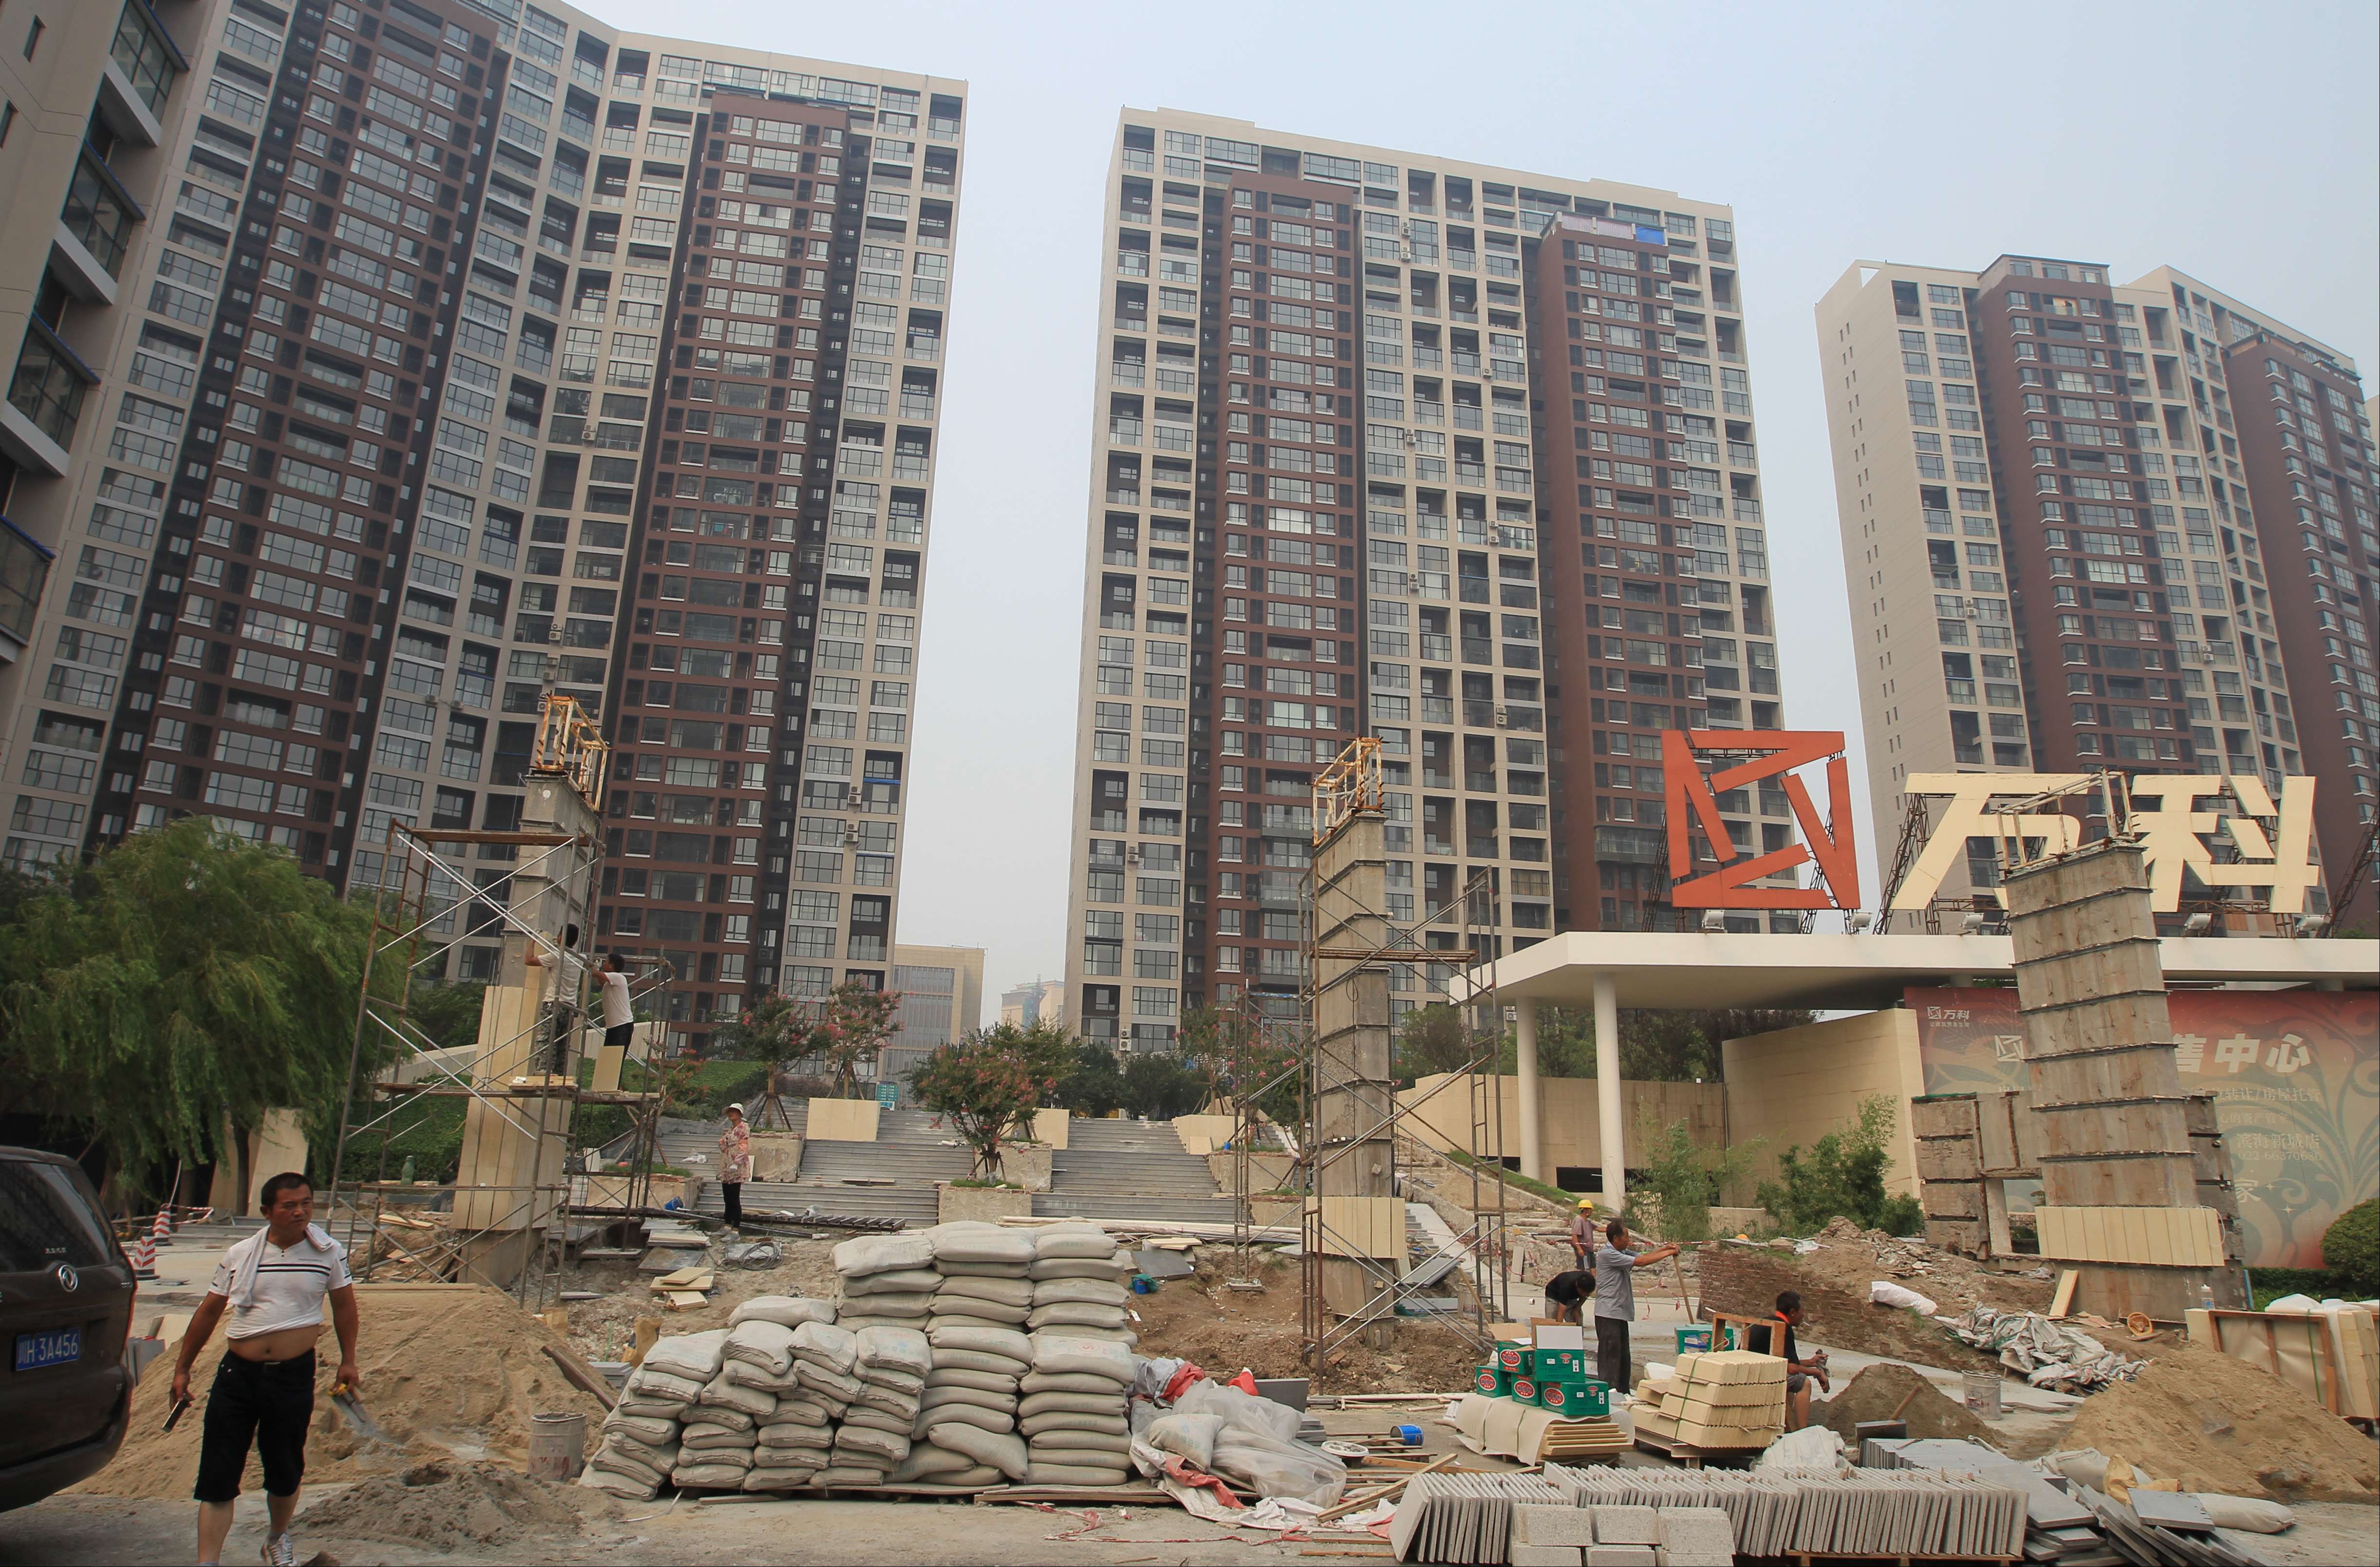 The entrance to a residential area is under renovation in Tianjin a year after the blasts. Many windows in these buildings were damaged in last year's explosions. Photo: Simon Song